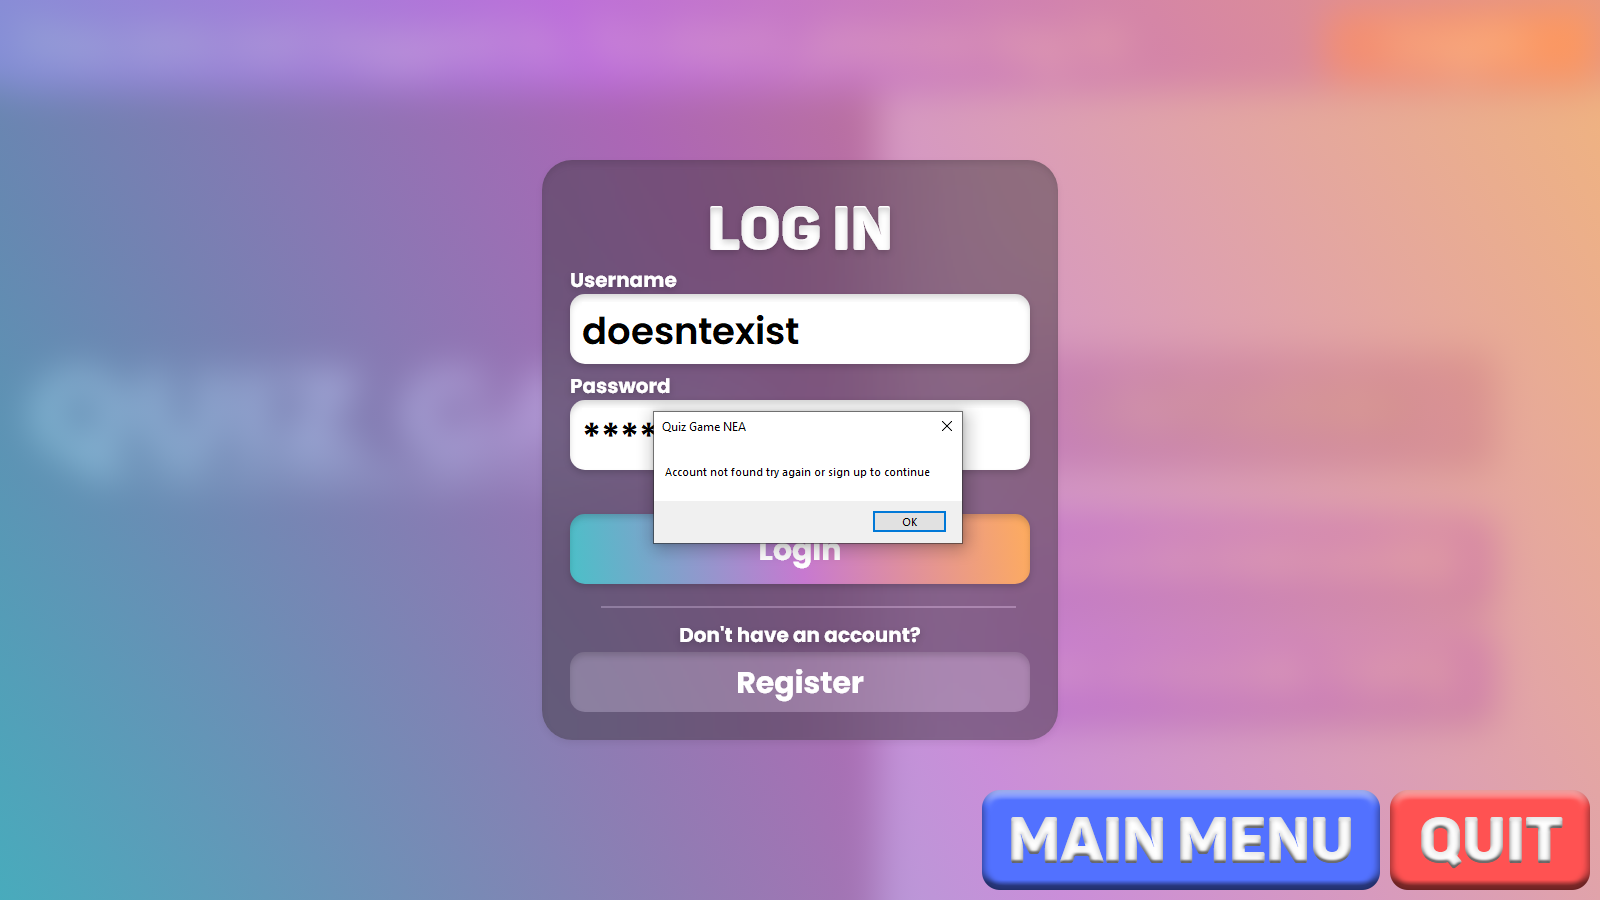 Login with account that doesnt exist